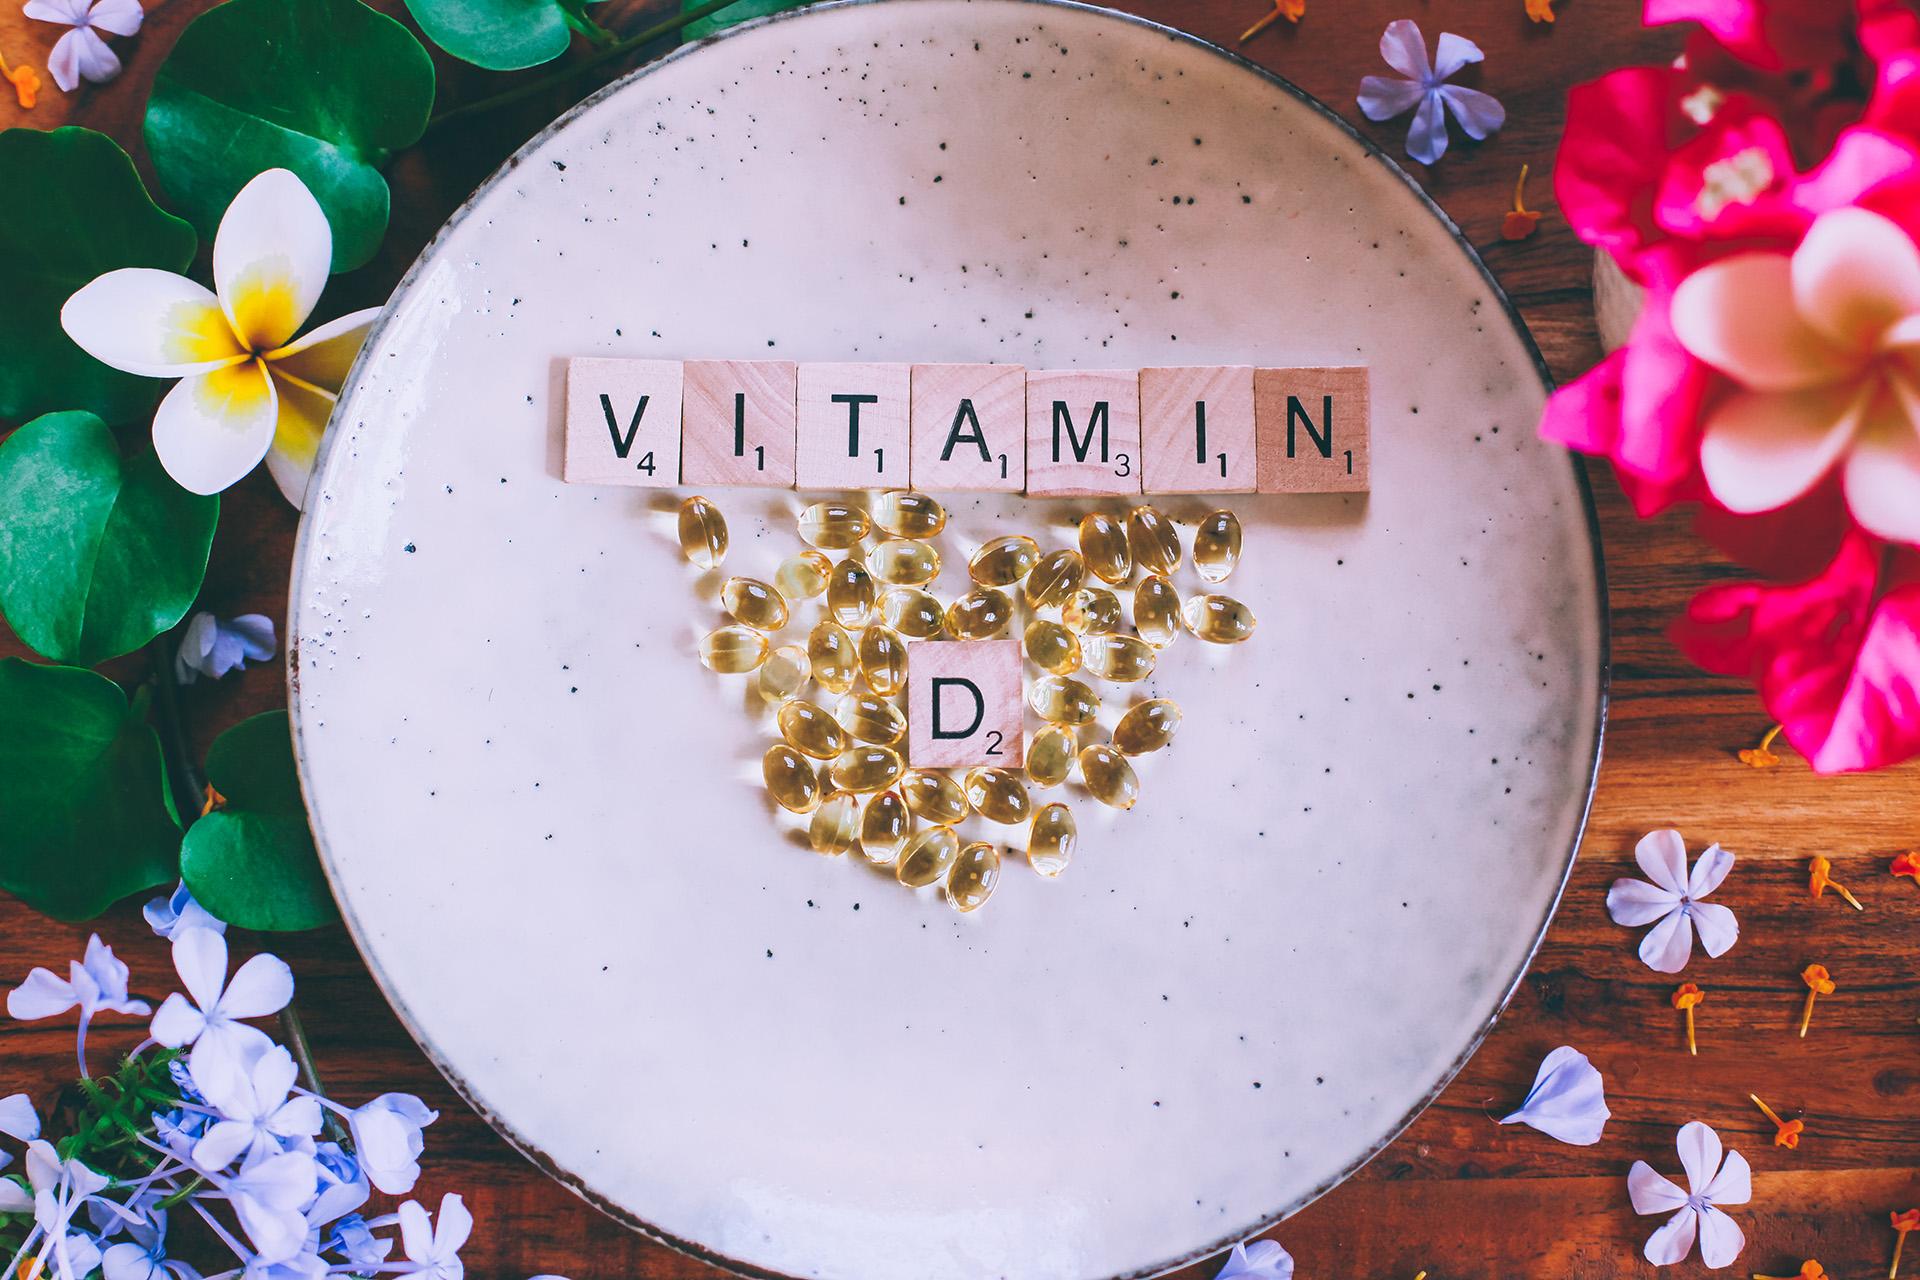 25 Hydroxy Vitamin D Test: Purpose, Process, Results and Risks